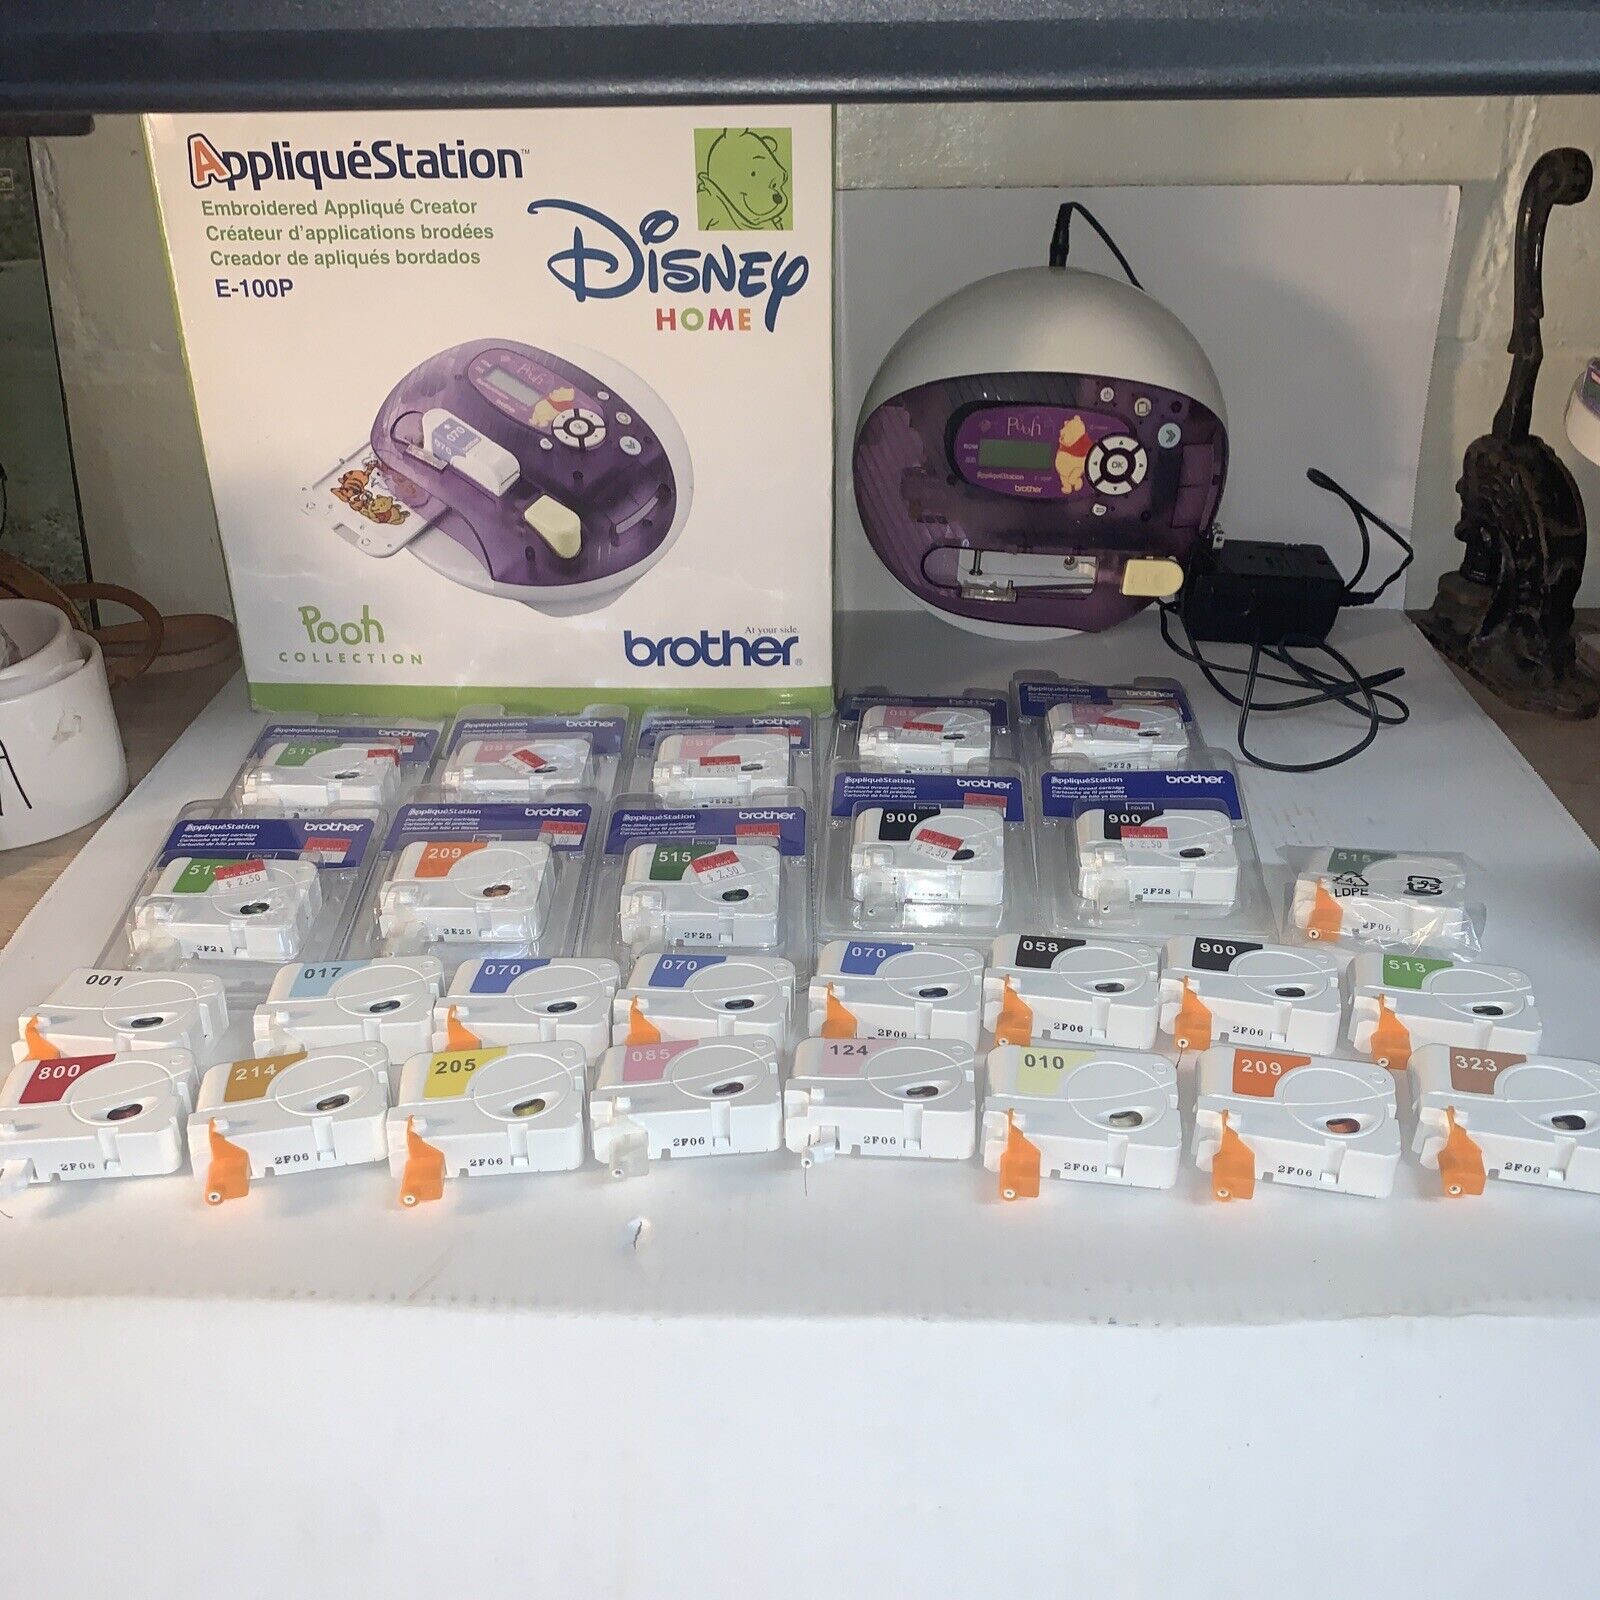 Disney Home Pooh Collection Brother Applique Station Embroidery Machine E-100p